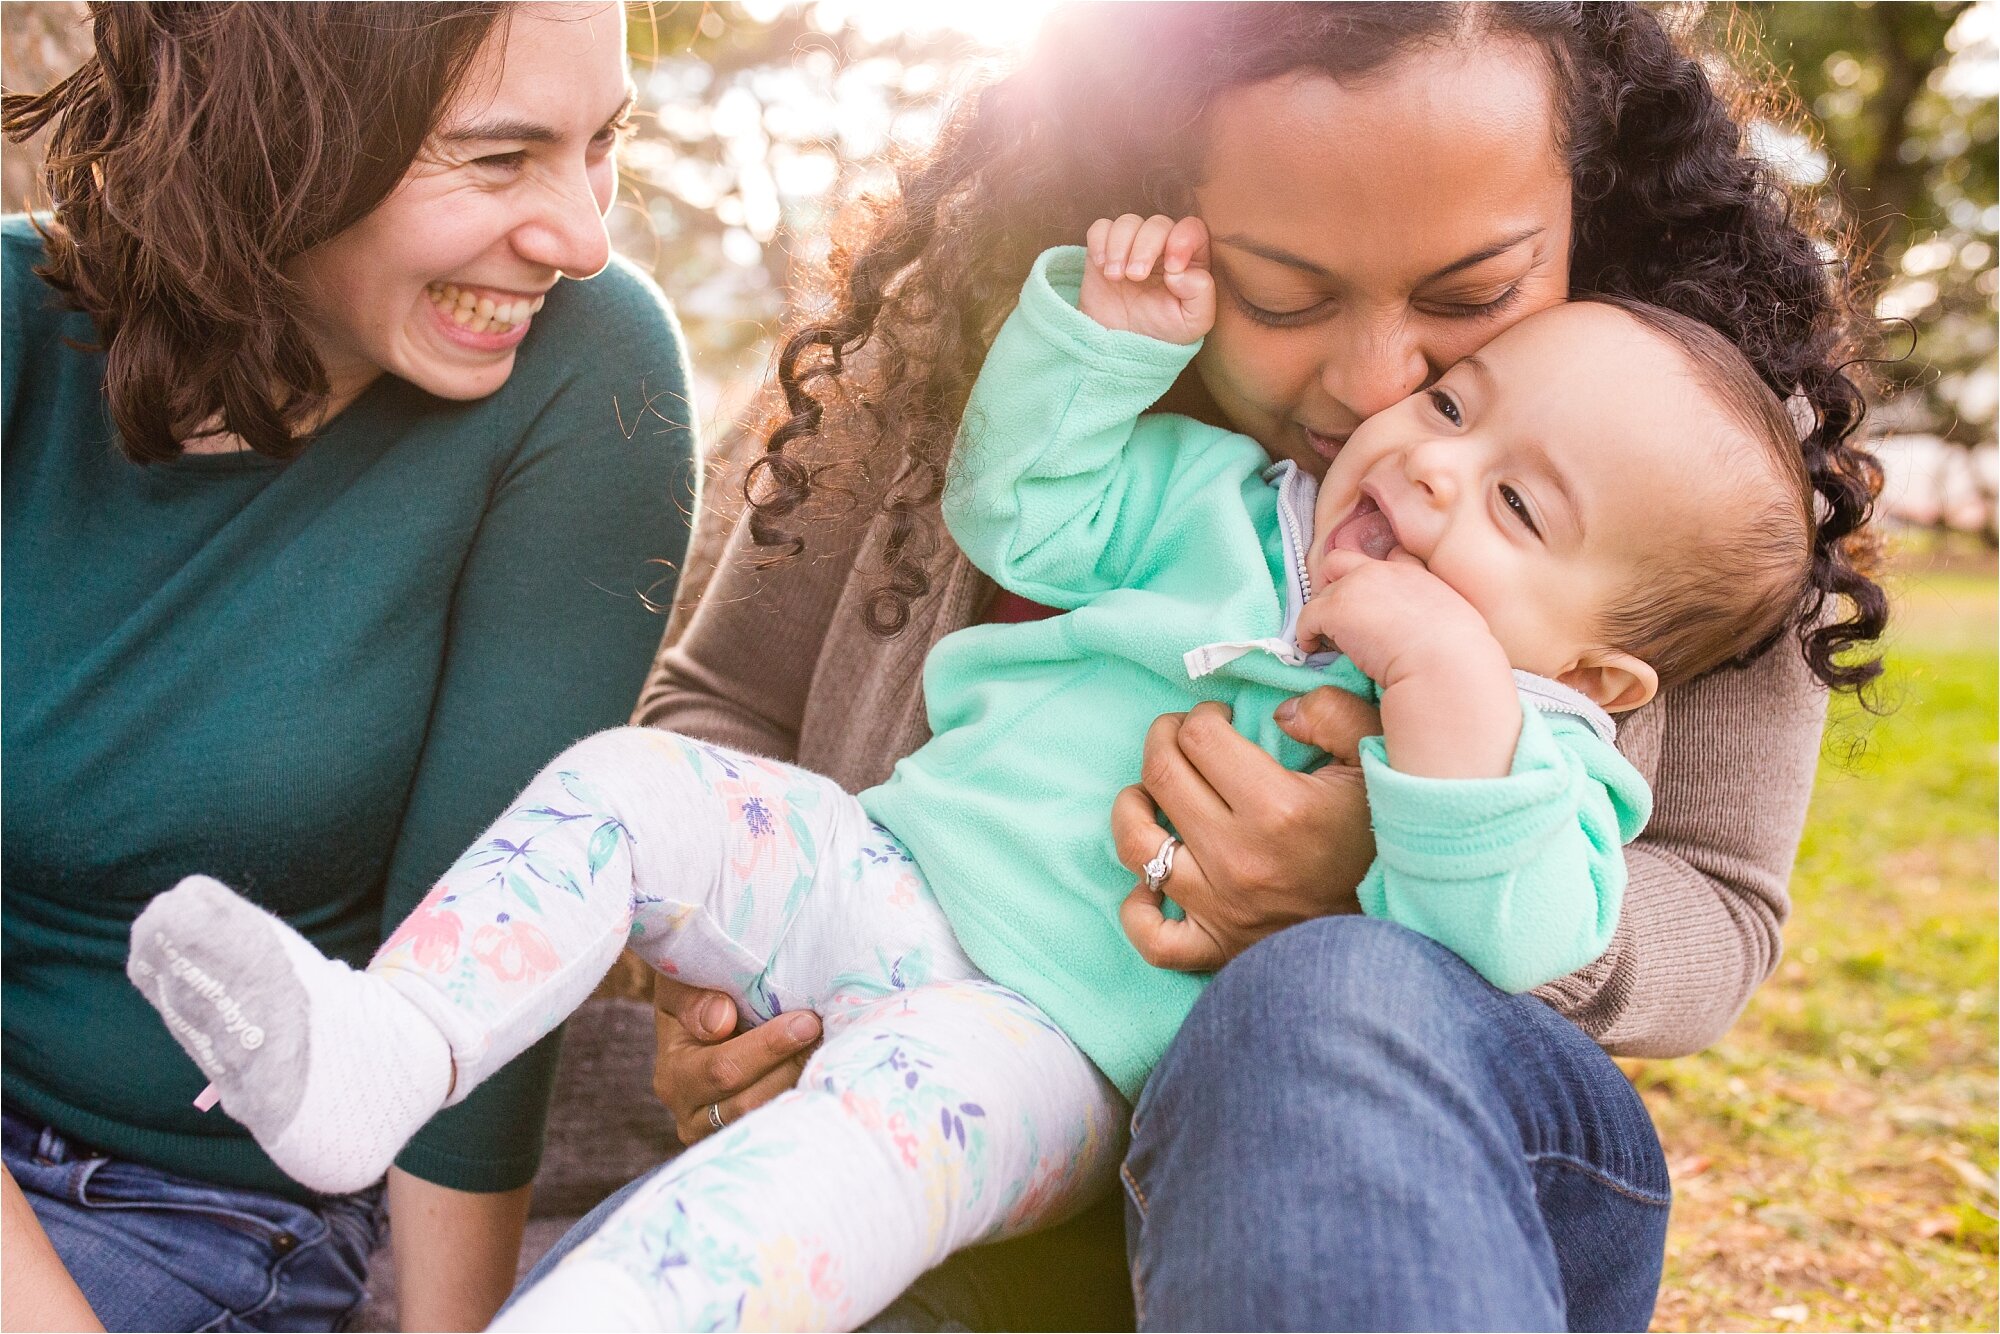 Lesbian gay mommies smile and make their baby daughter laugh, Family Photographer Philadelphia